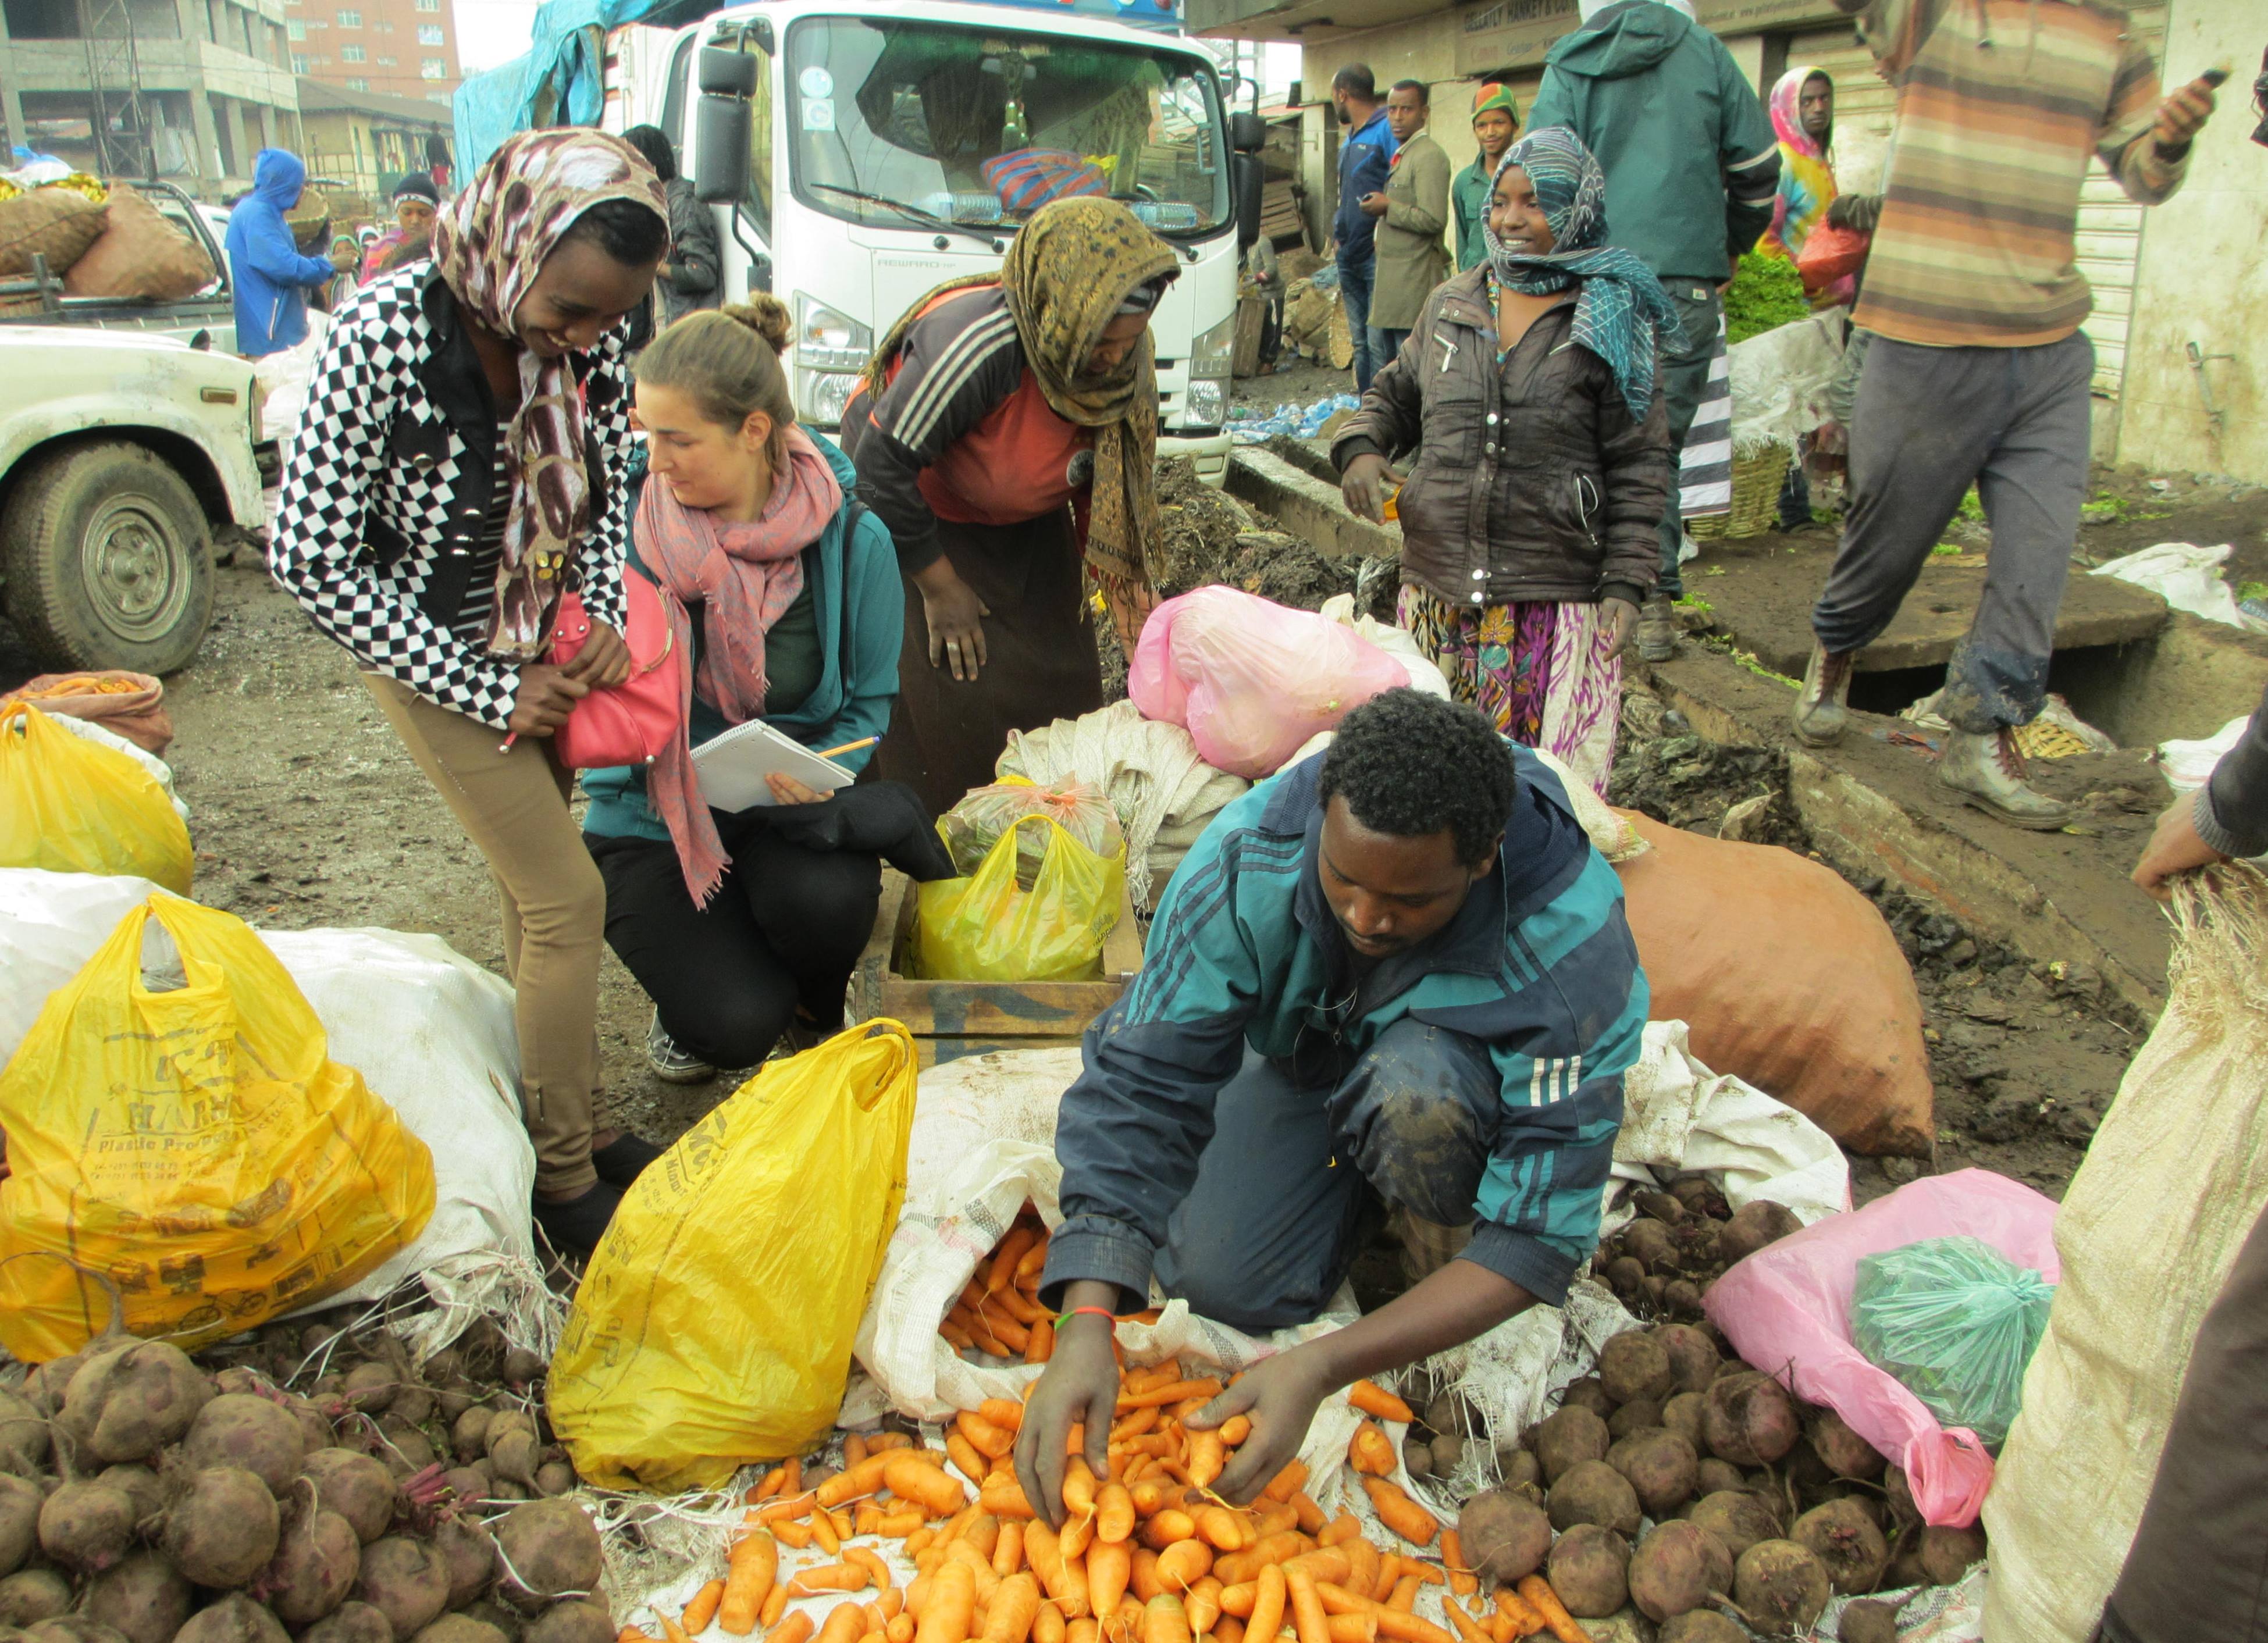 Students conducting interviews at the vegetable market in Addis Ababa